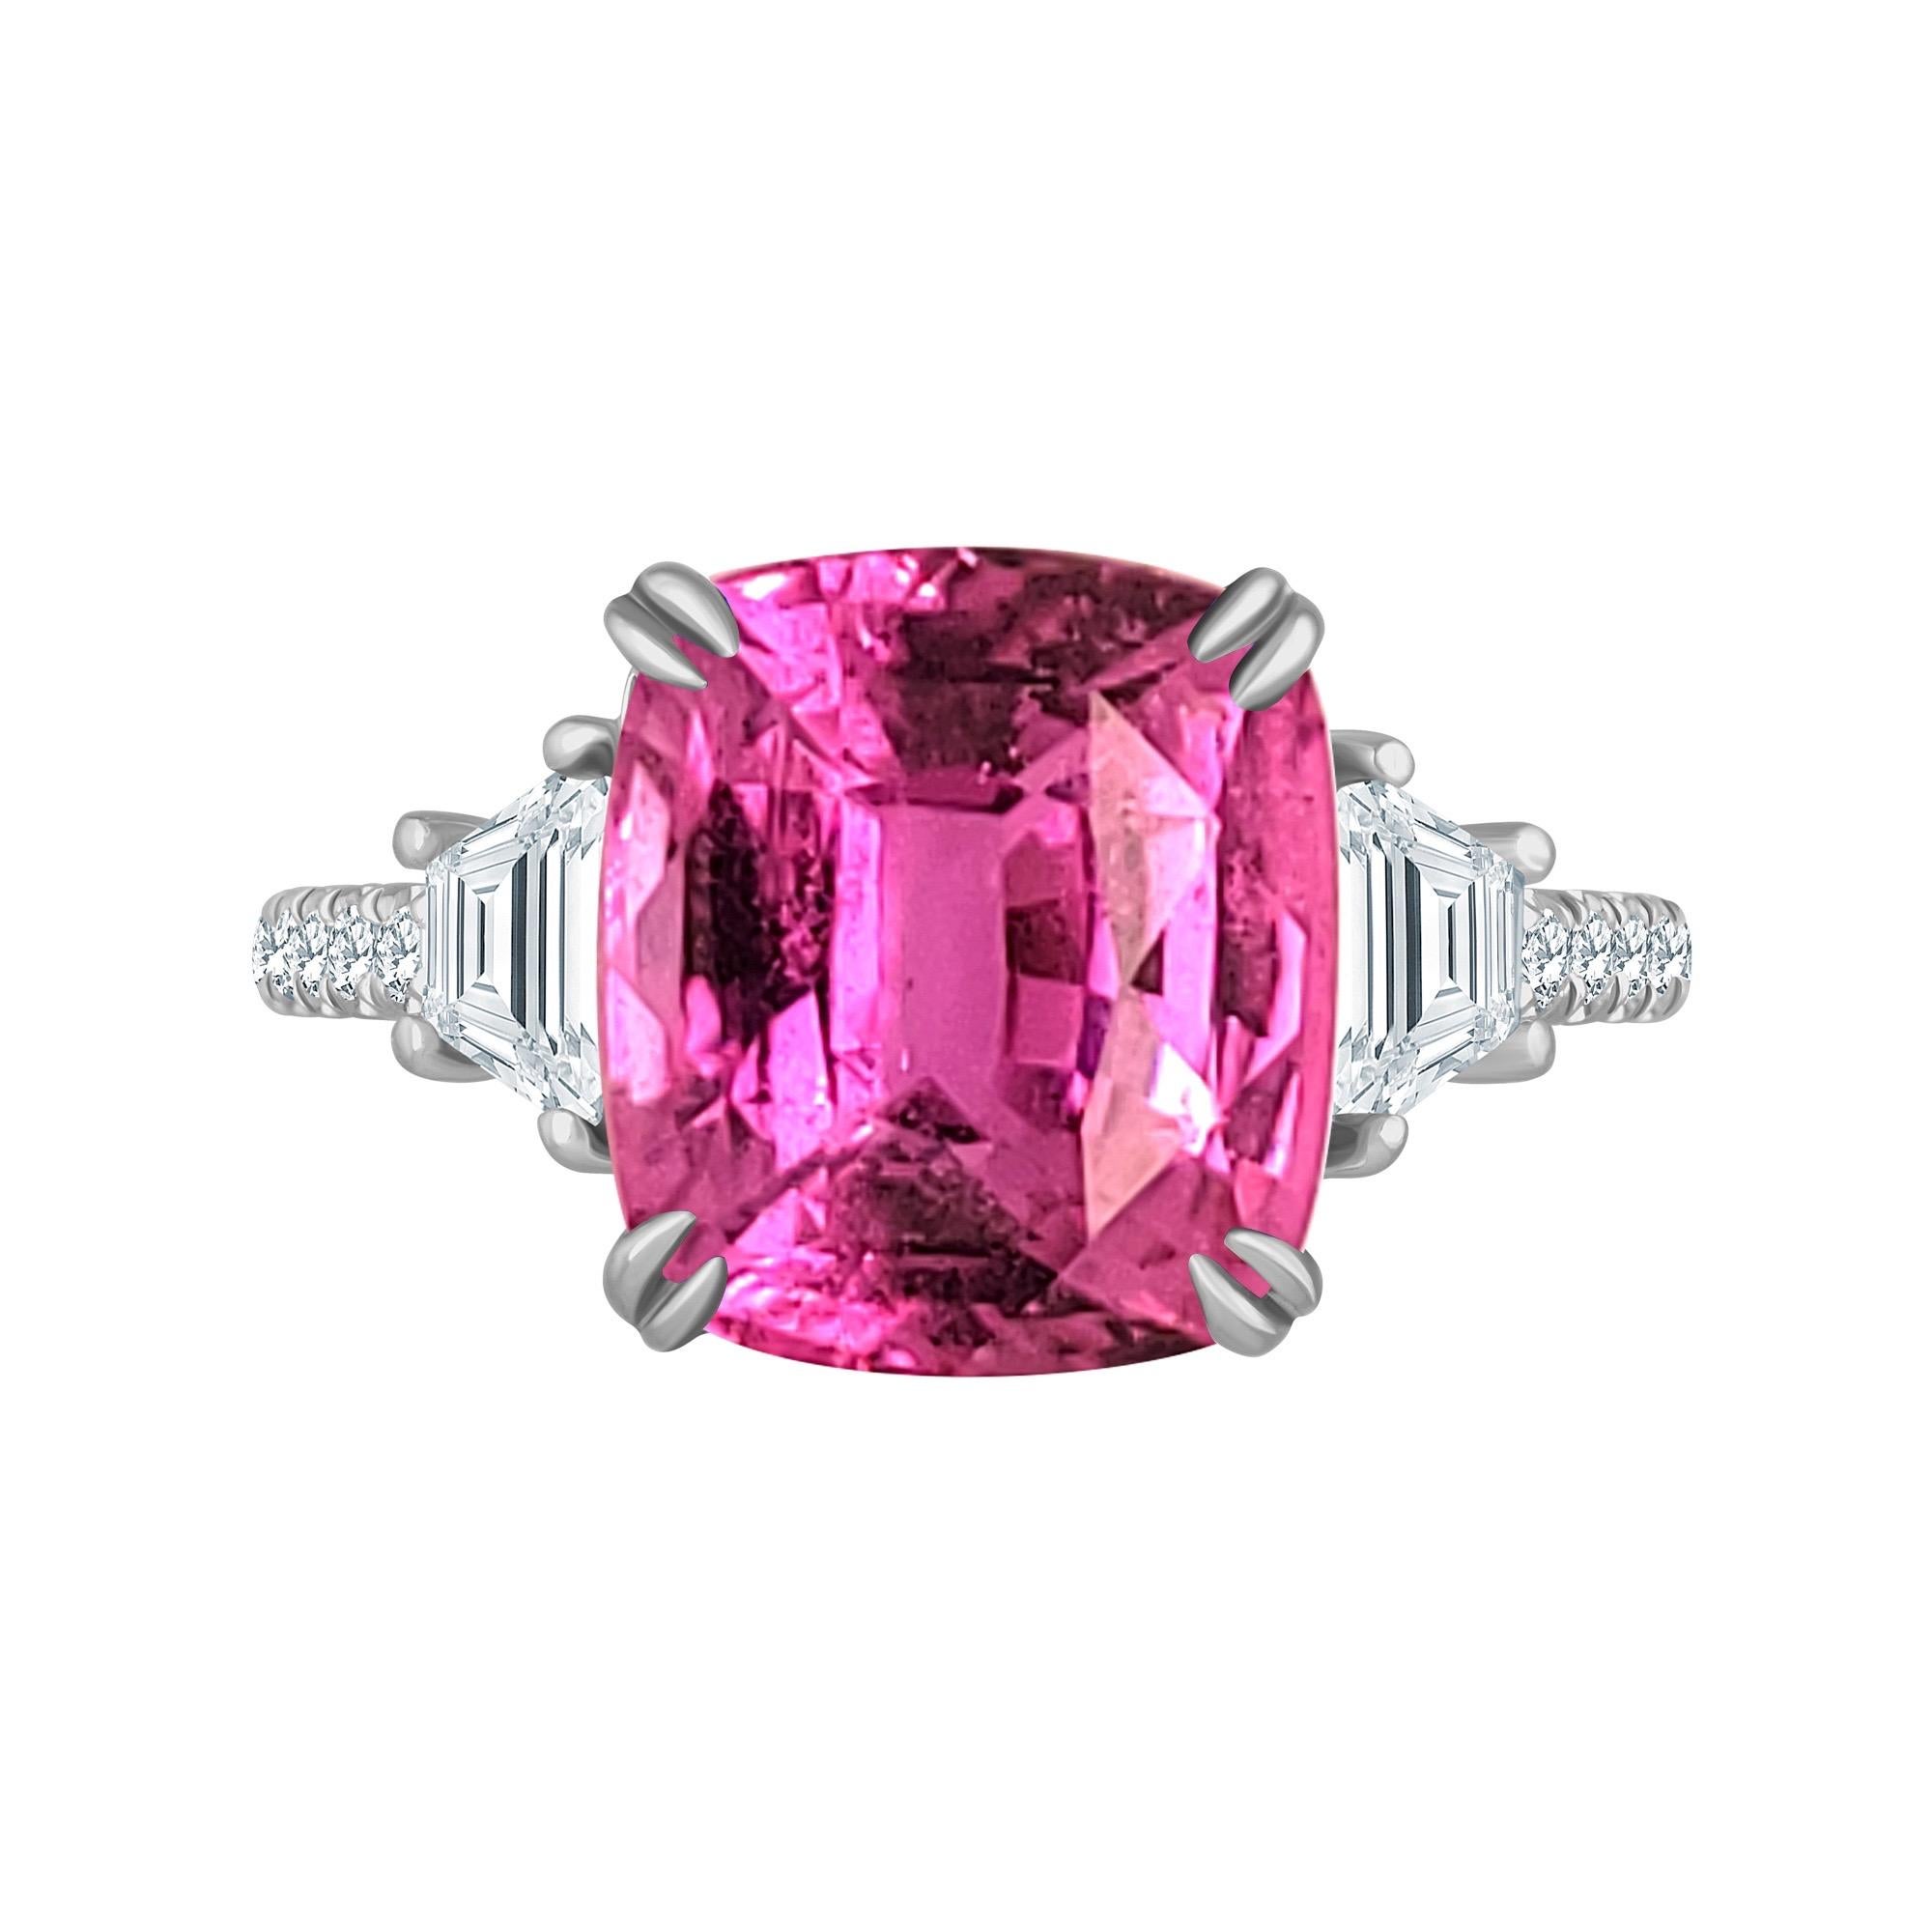 From the vault at Emilio Jewelry Located on New York's Fifth Avenue,

a Gia Certified gorgeous pink sapphire with excellent color, transparency and vibrant set in Platinum. Total weight approximately 3.00 carats/ 
Please inquire for additional